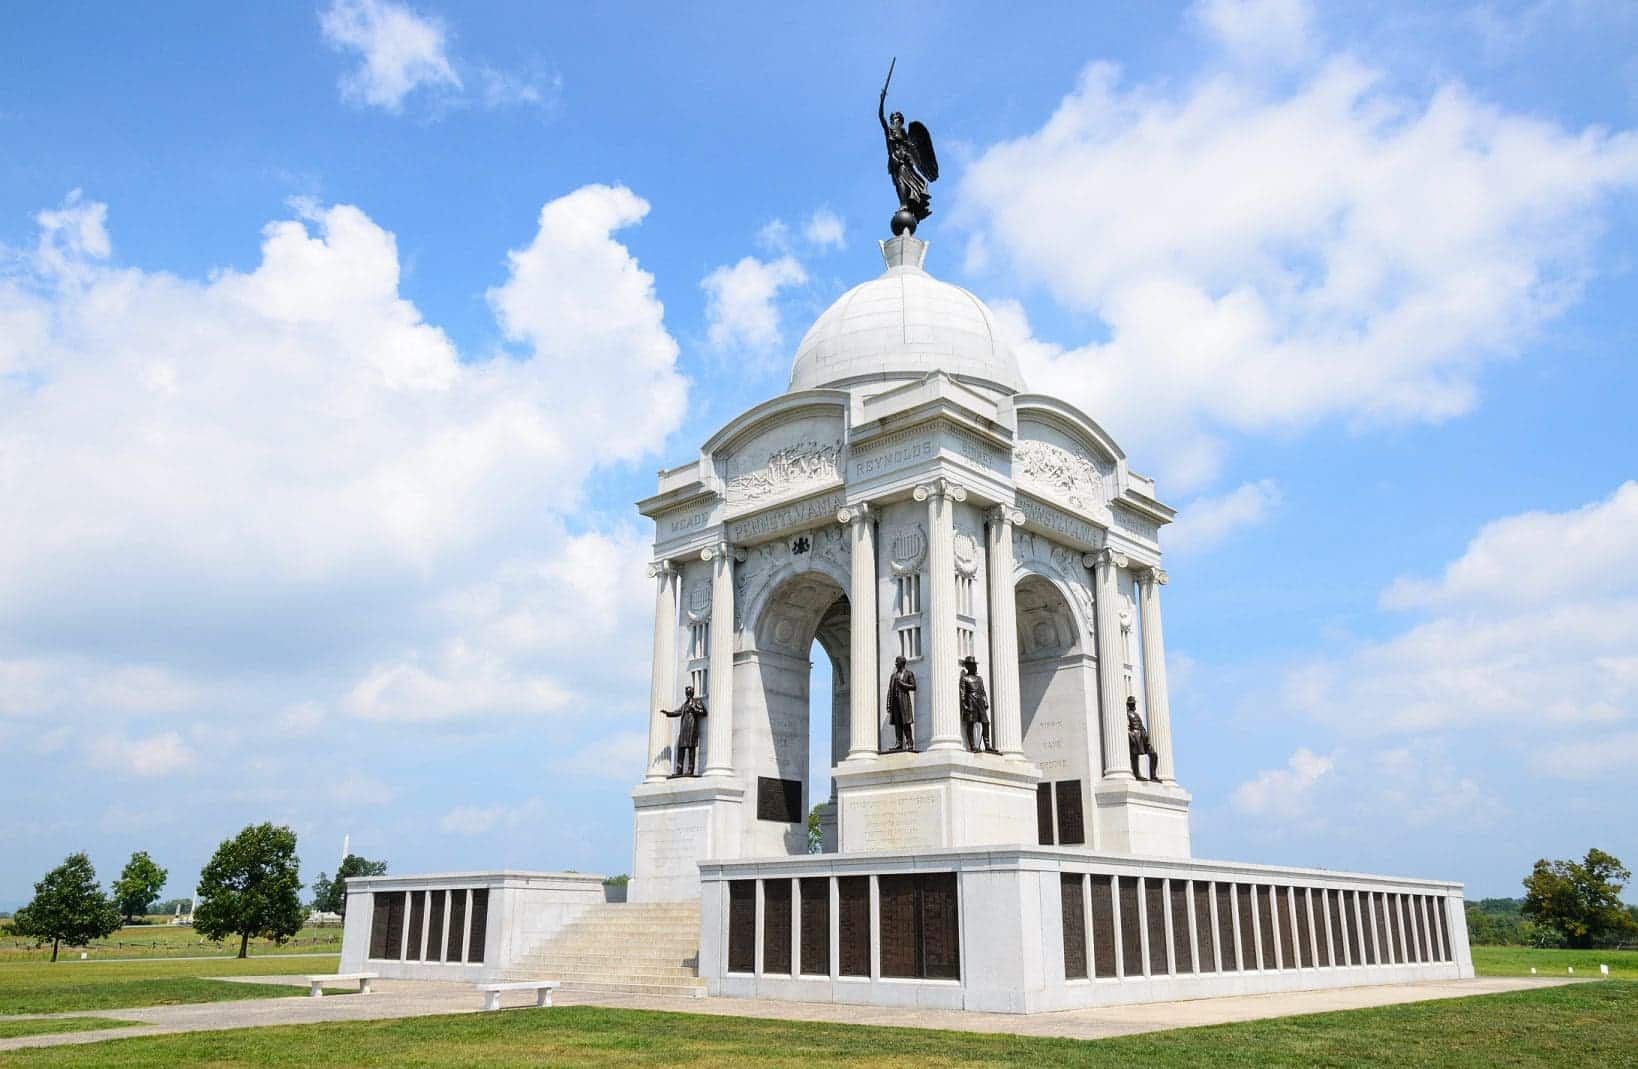 How much does it cost to get into Gettysburg National Military Park?